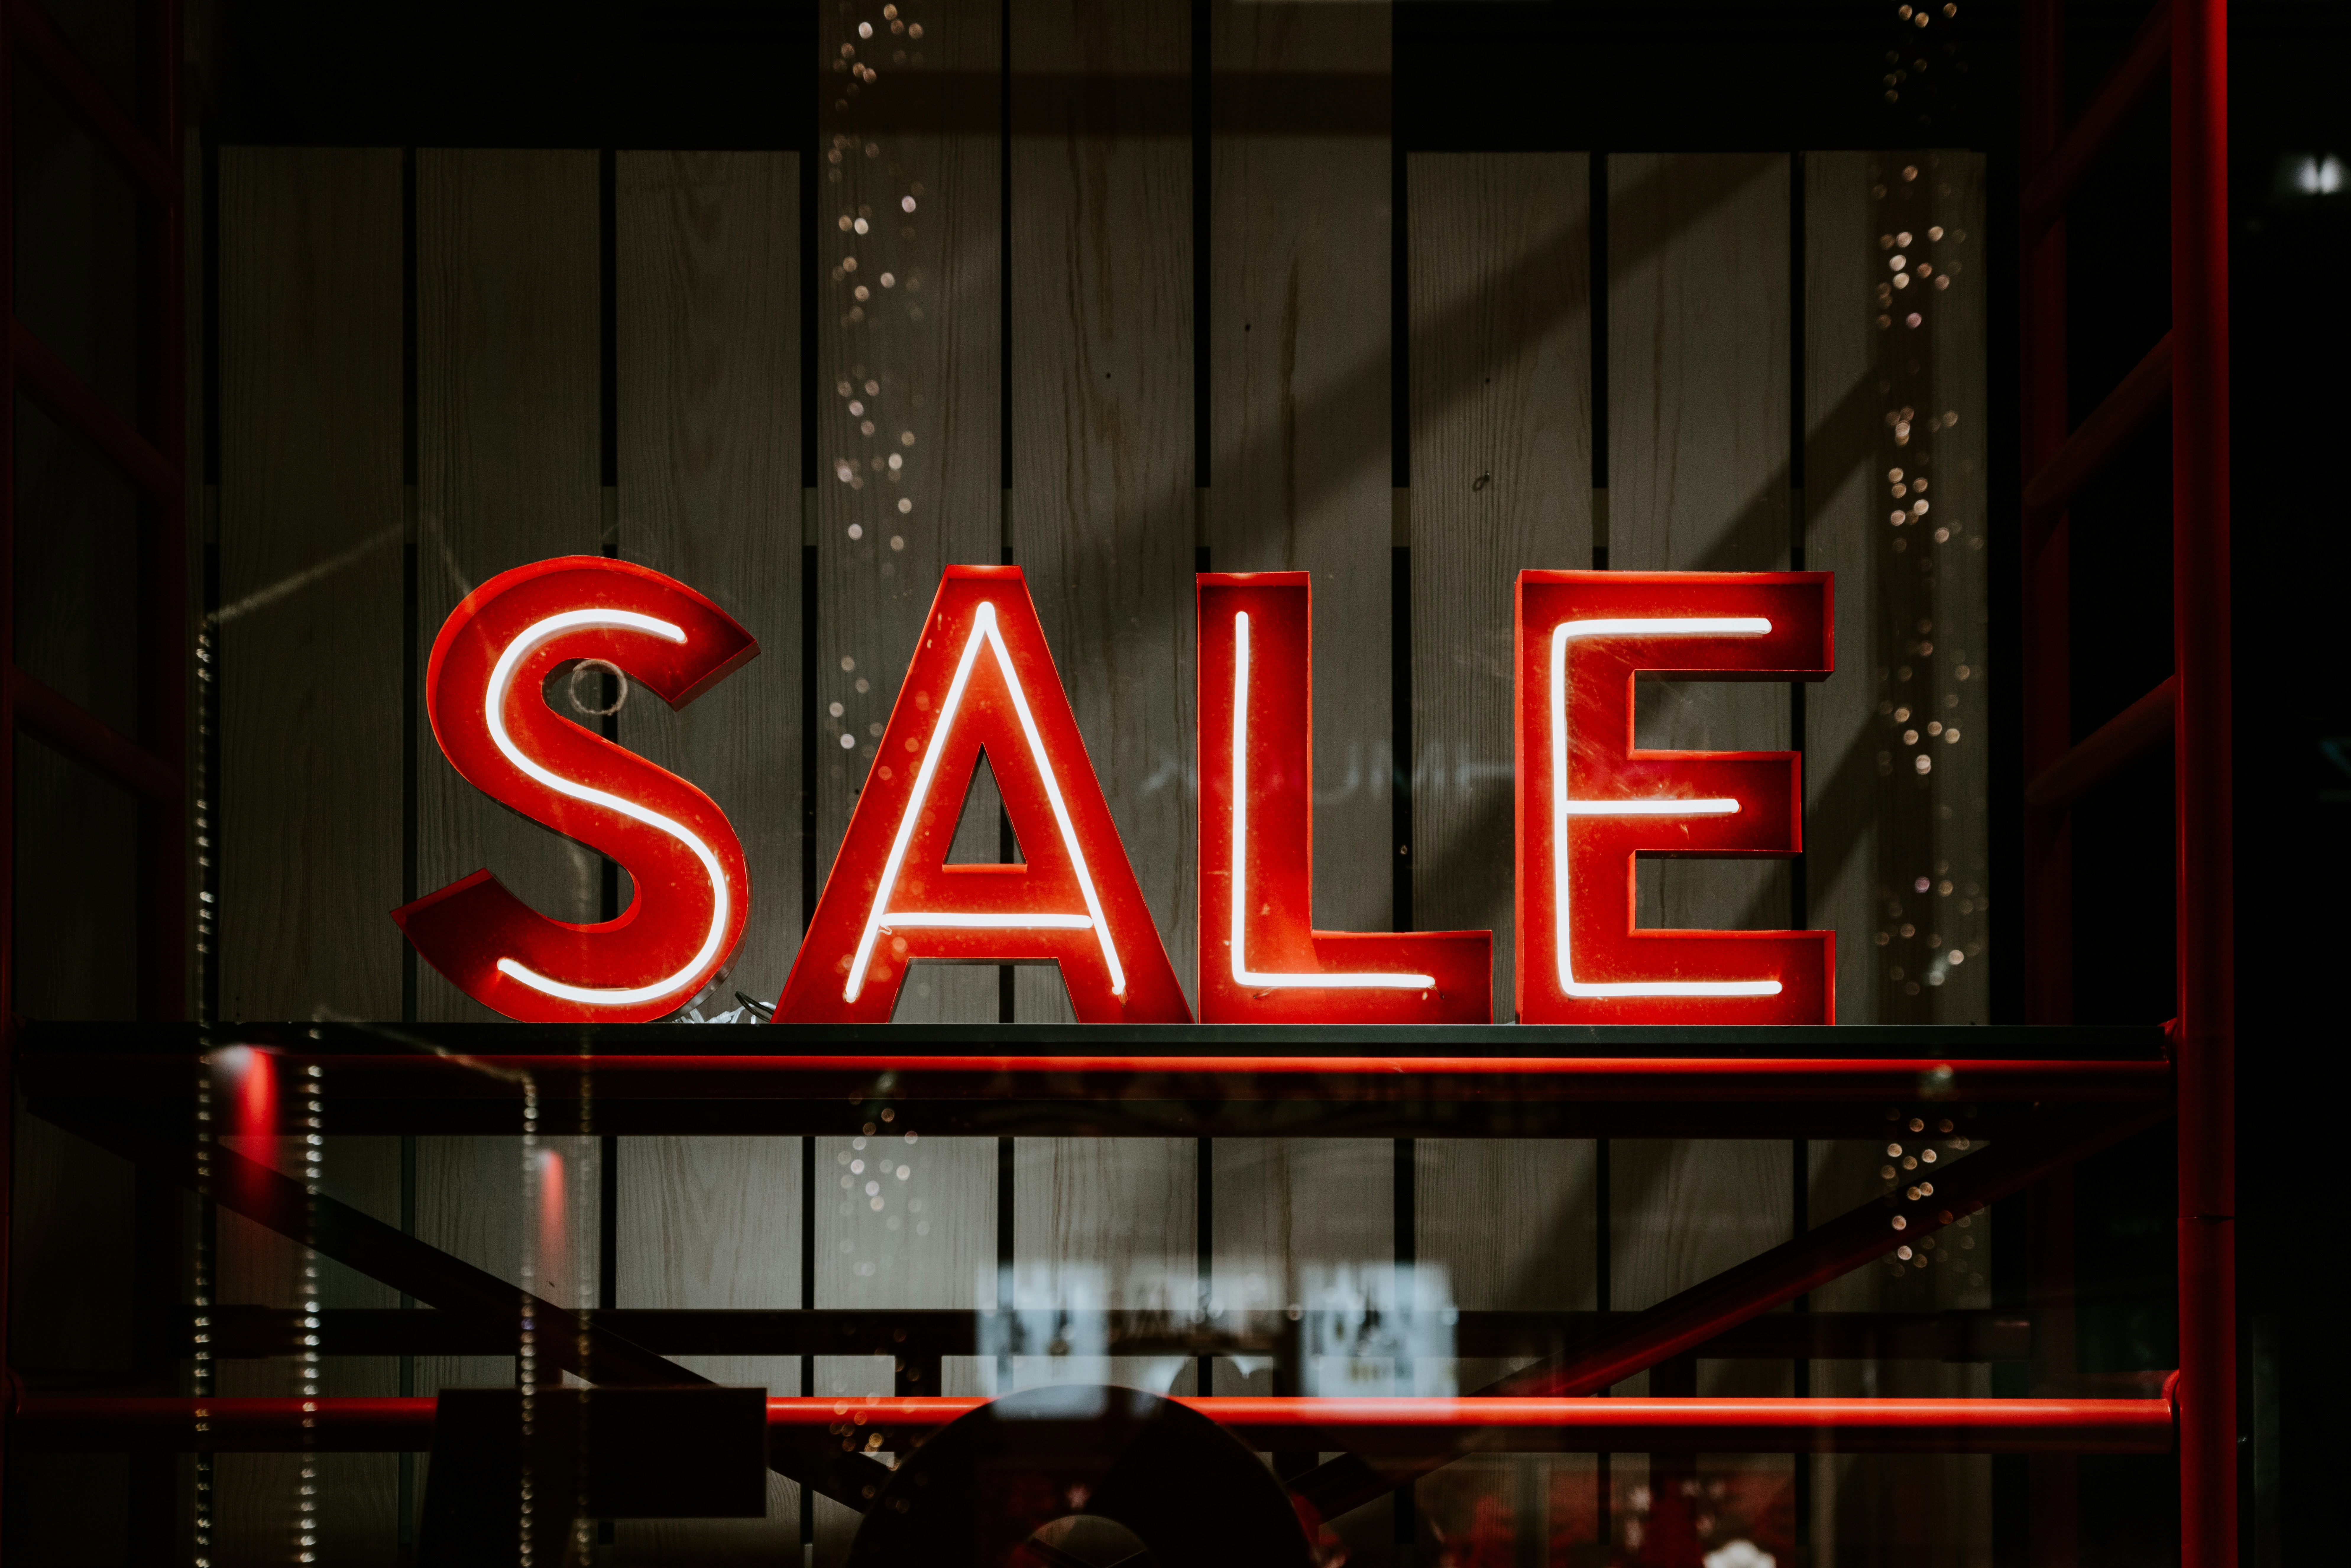 sales image of a sign saying sale